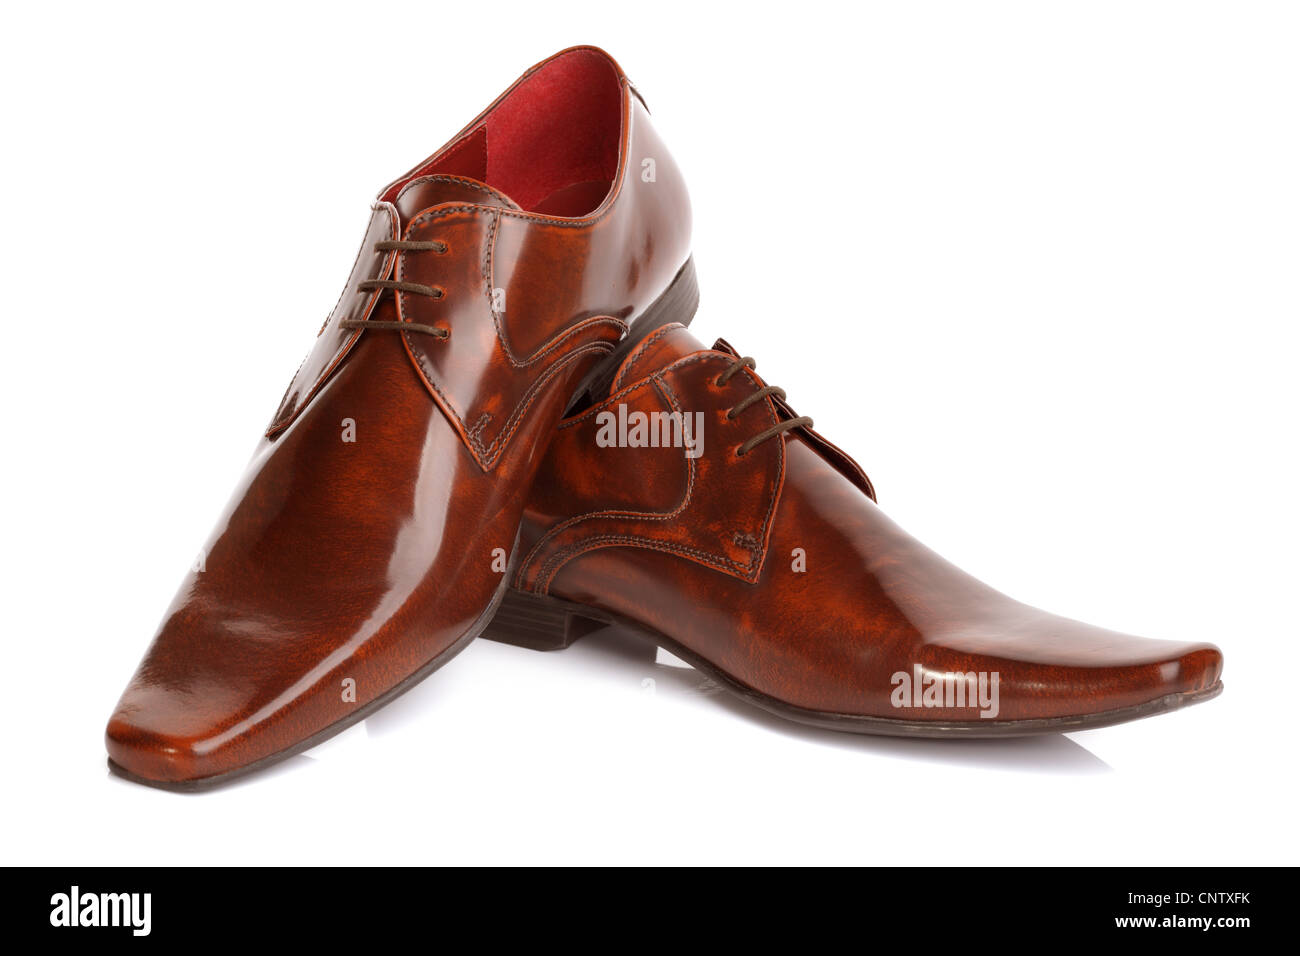 Mans leather fashion shoes Stock Photo